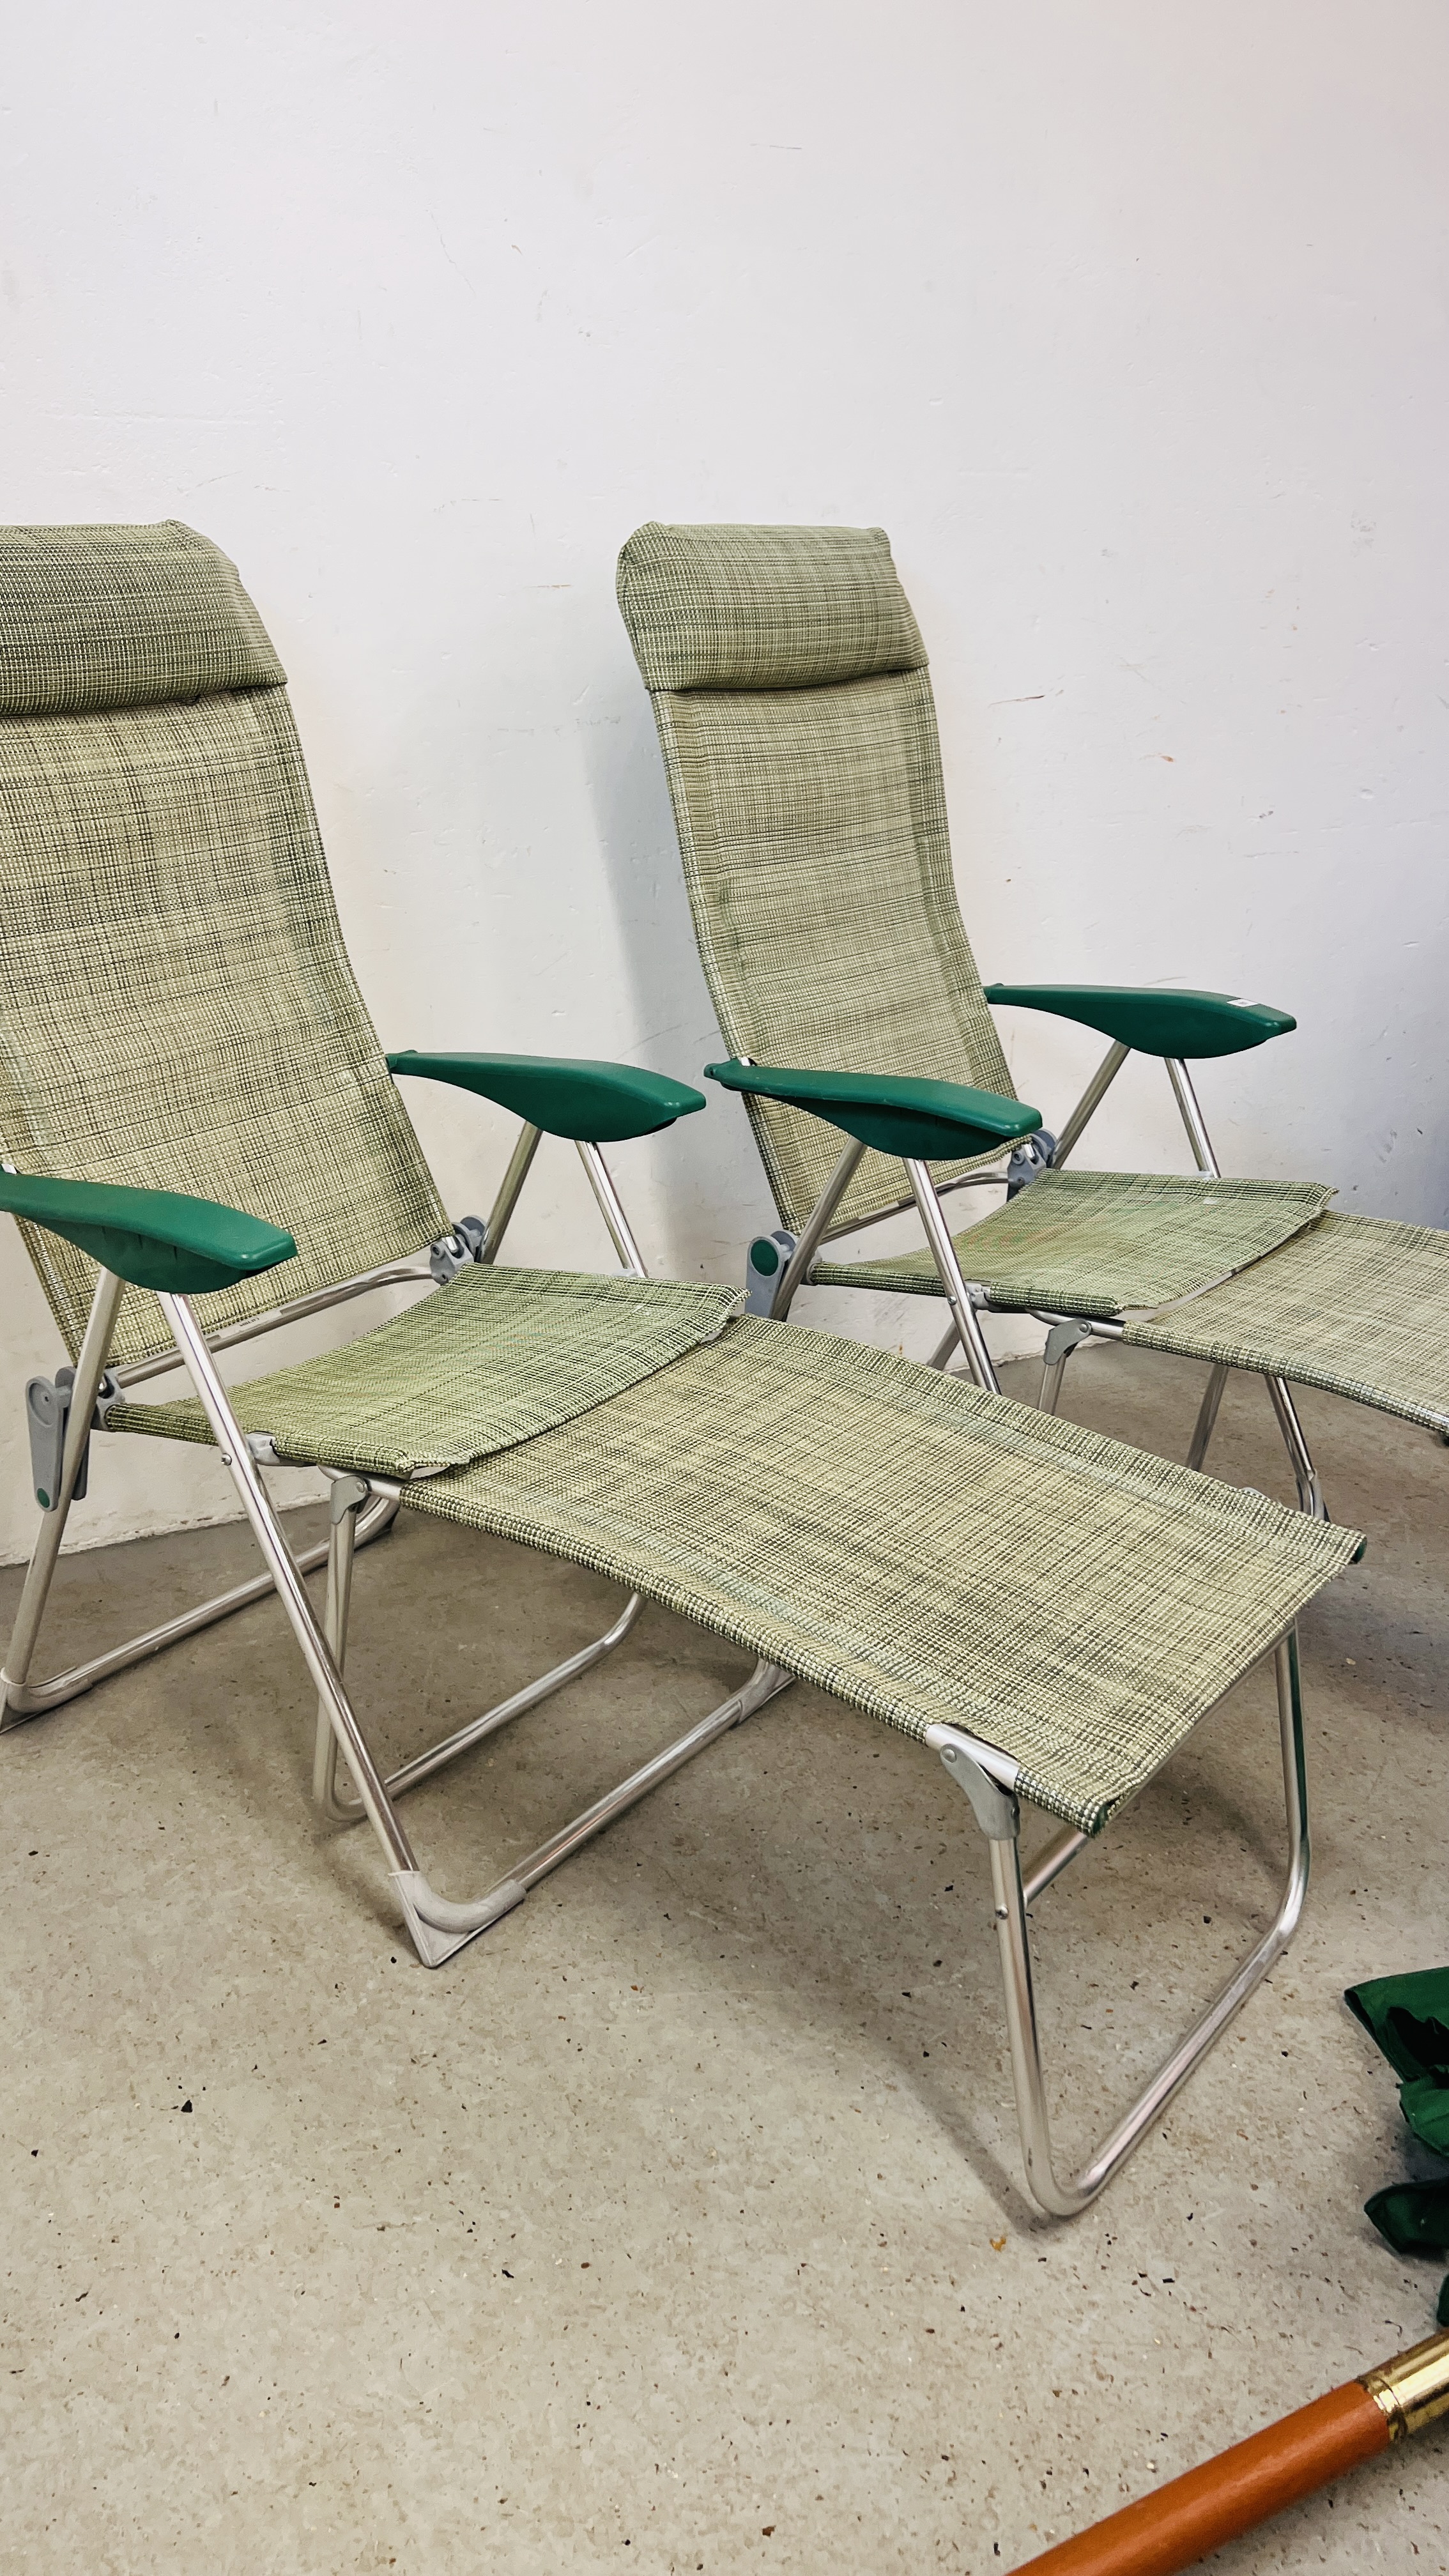 A PAIR OF ALUMINIUM FRAMED FOLDING SUN CHAIRS WITH MATCHING FOLDING FOOT RESTS AND GARDEN PARASOL. - Image 7 of 10